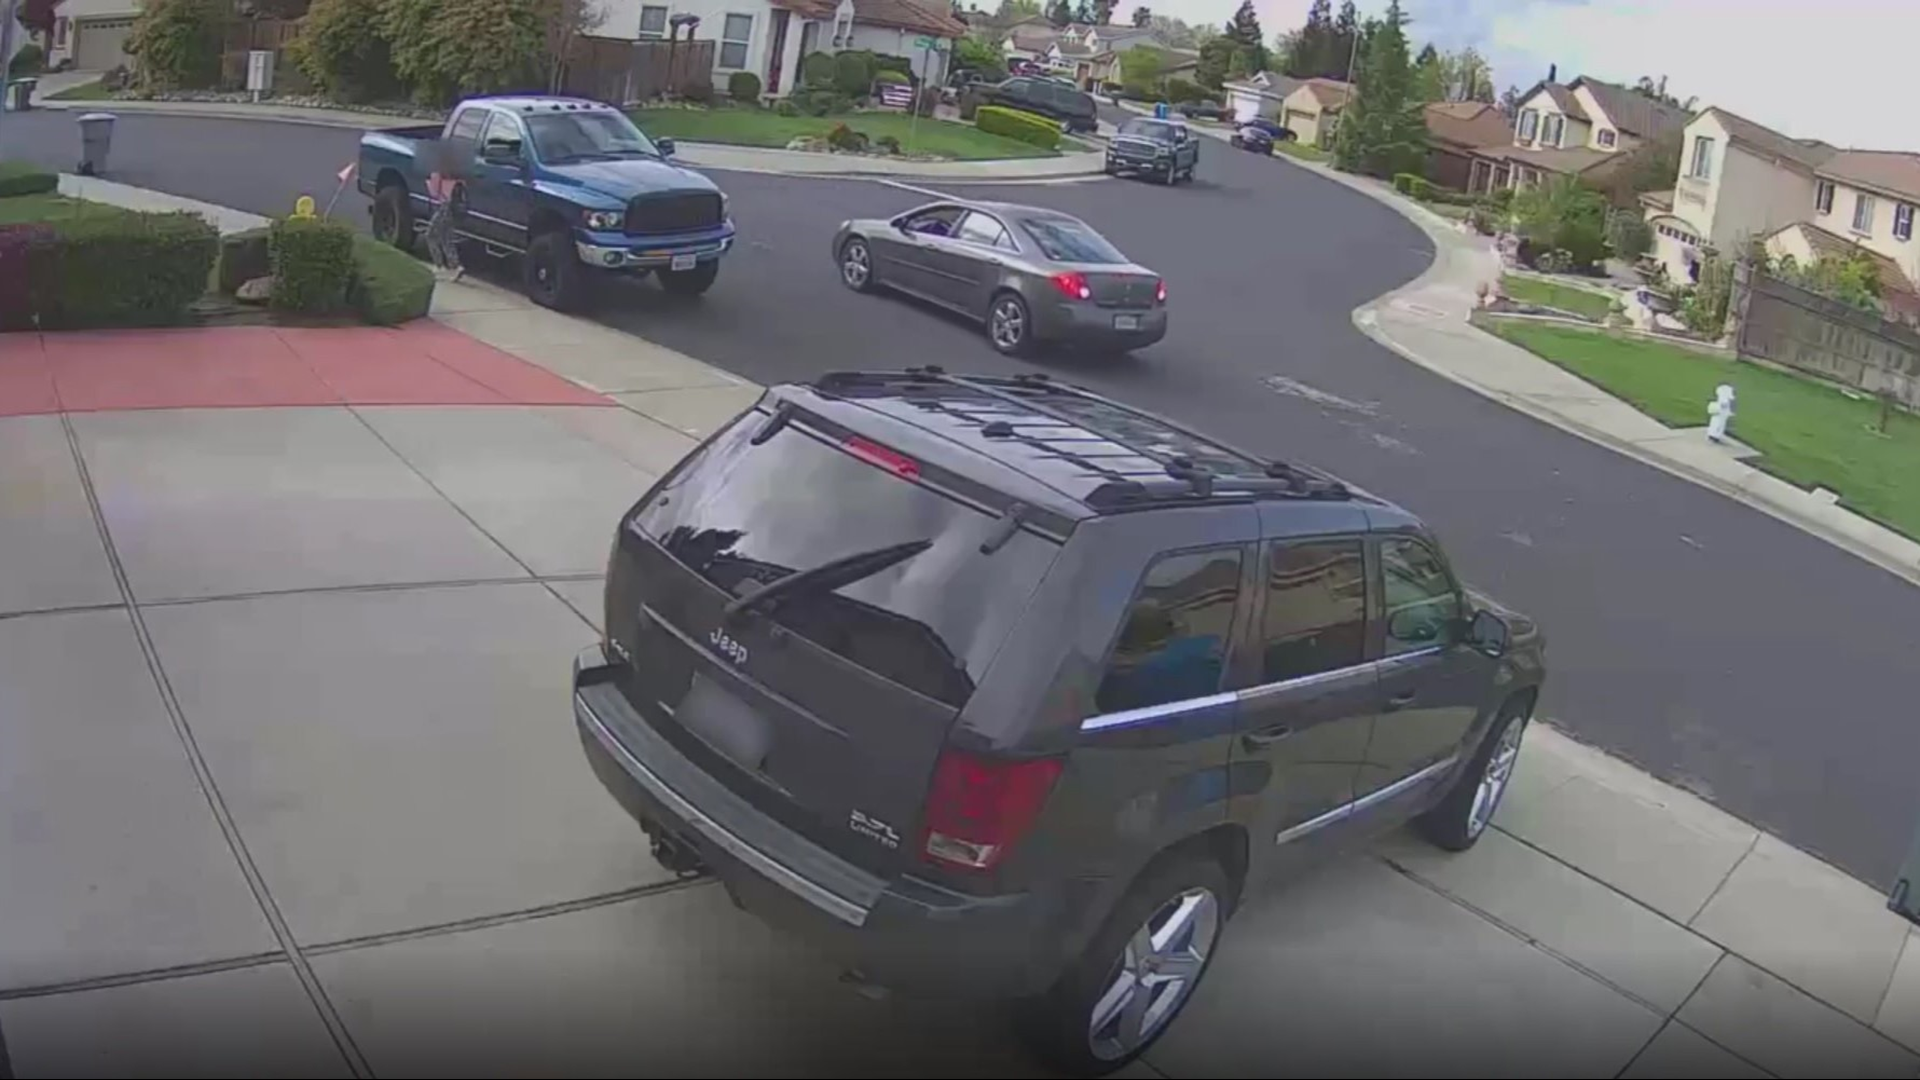 The Vacaville Police Department posted surveillance video that appears to show a dark-colored Pontiac following a child in a neighborhood. If you have any information, you are asked to call Detective Brian Collins at 707-469-4735.